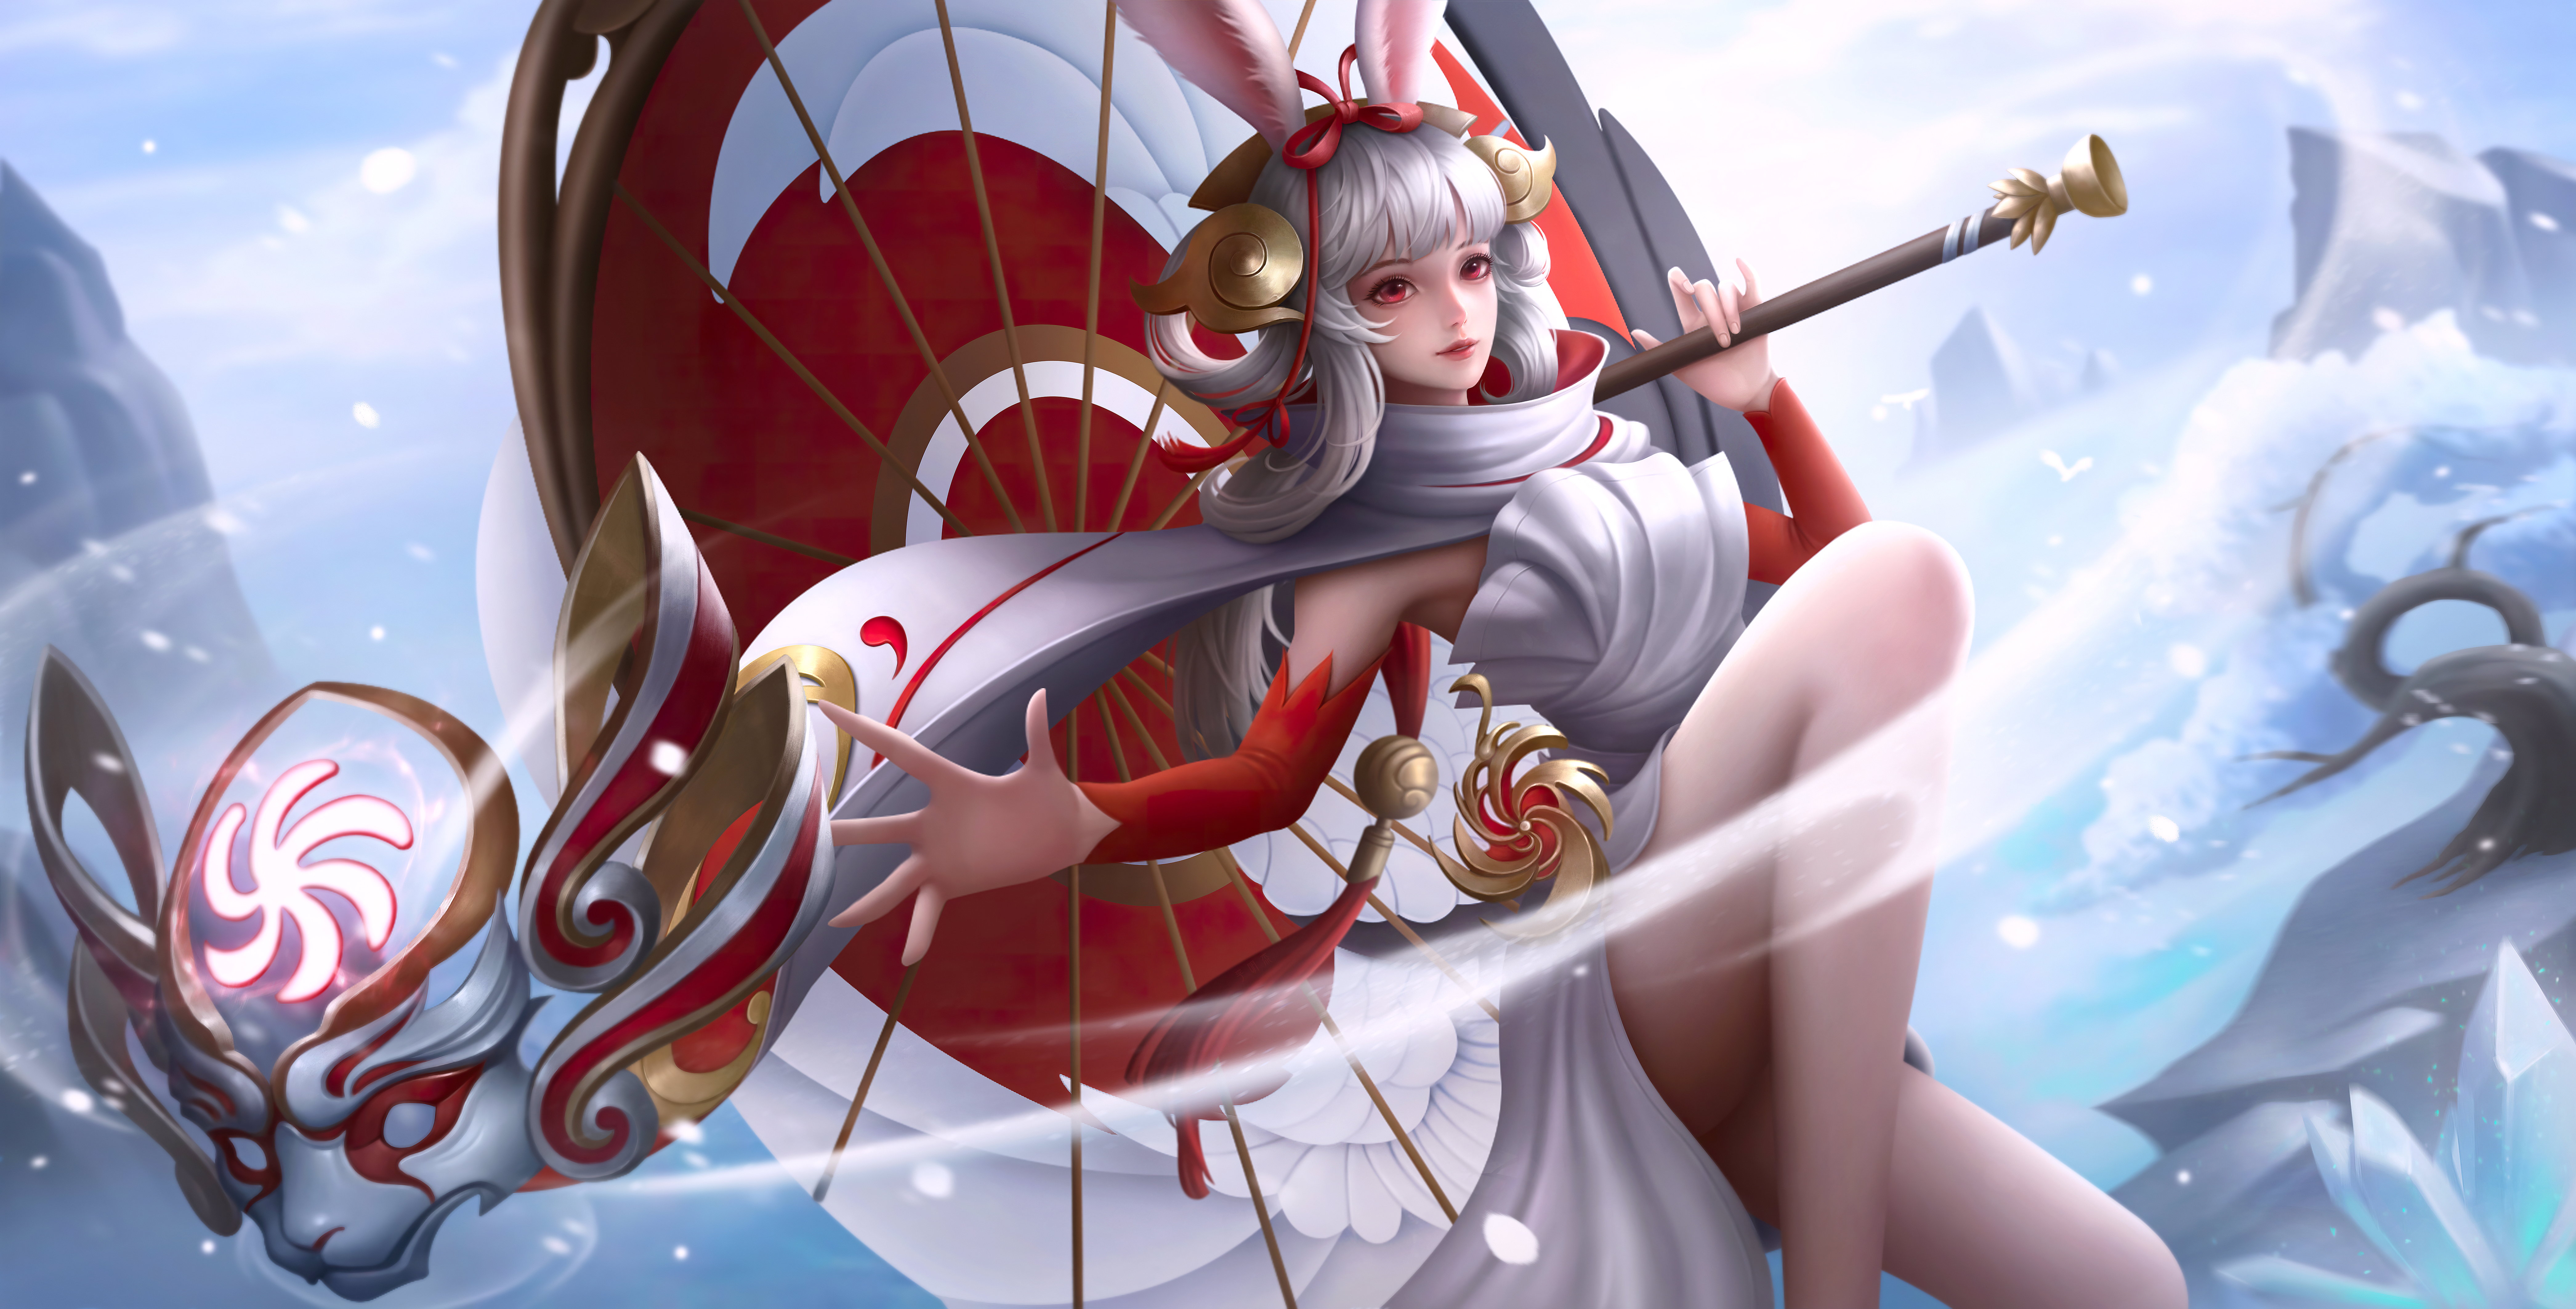 Honor Of Kings Game Characters Video Games Video Game Girls Red Eyes Legs Fantasy Art Fantasy Girl L 8366x4250